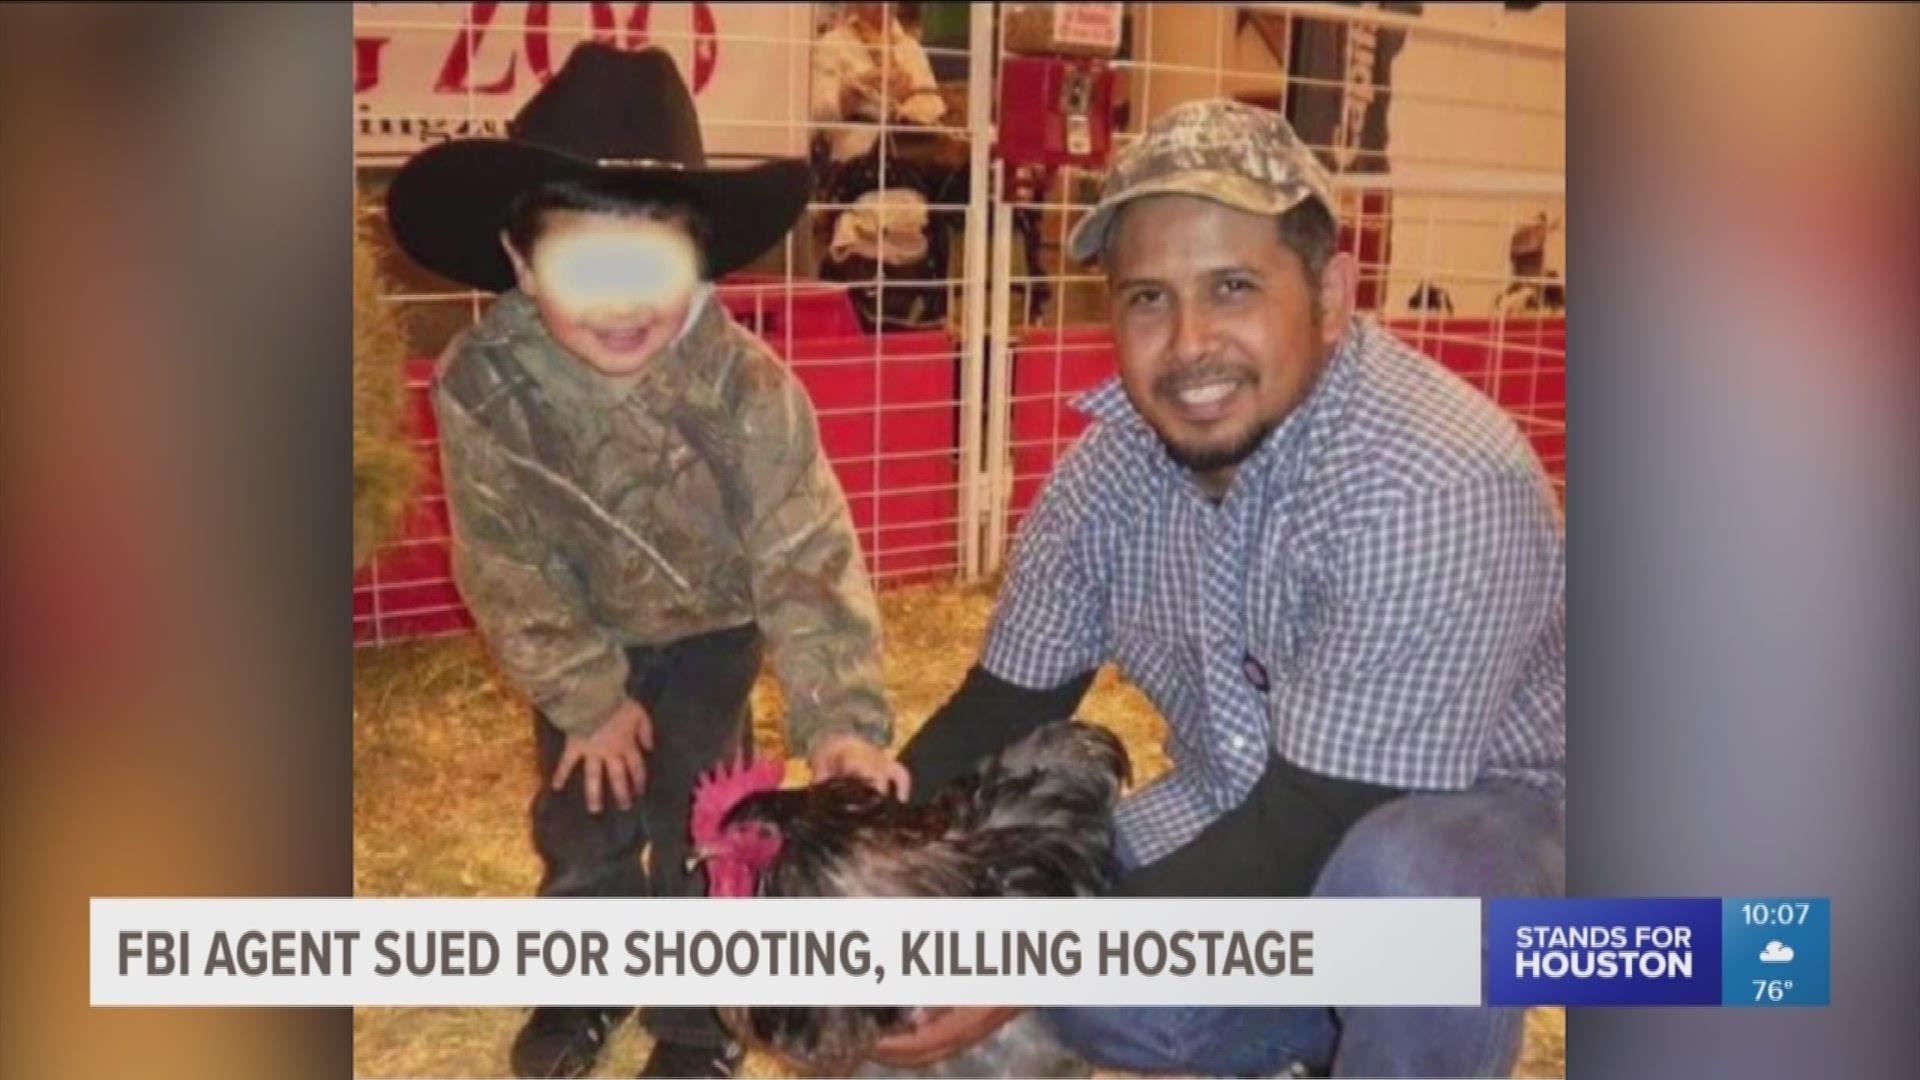 A wrongful death lawsuit was filed Sunday on behalf of a 12-year-old boy left orphaned after a FBI agent mistakenly shot and killed the boy?s father during a hostage situation in January.